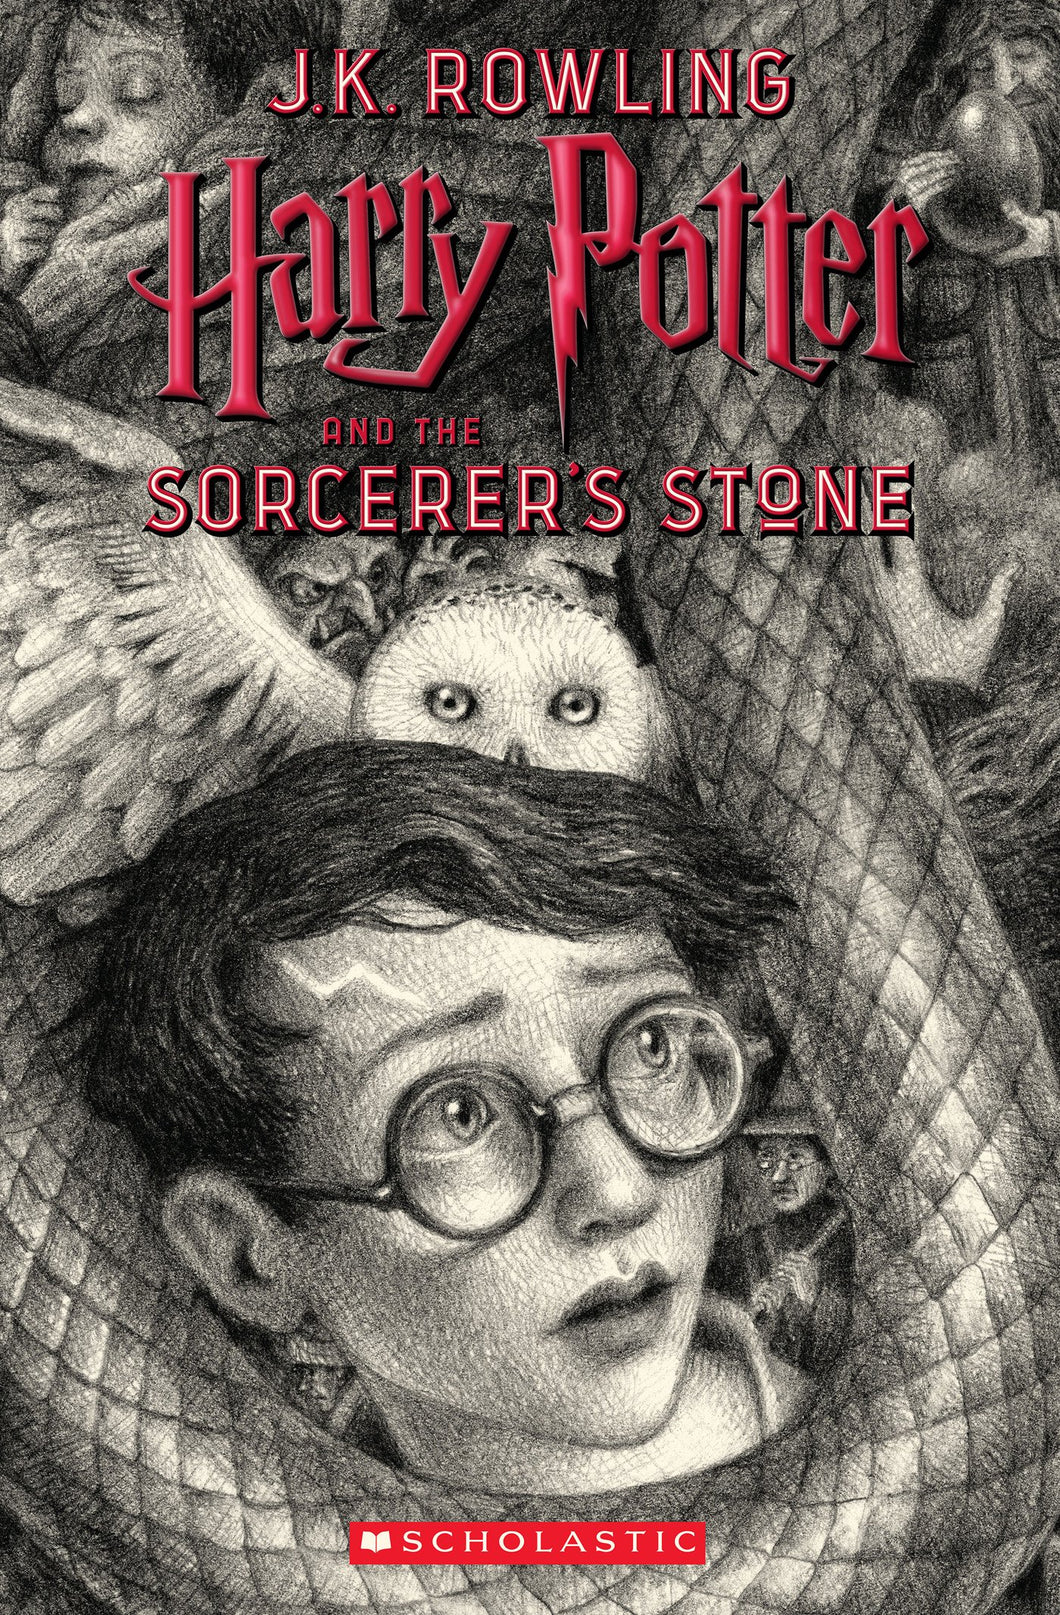 HARRY POTTER 1 AND THE SORCERERS STONE (20TH ANNIVERSARY)